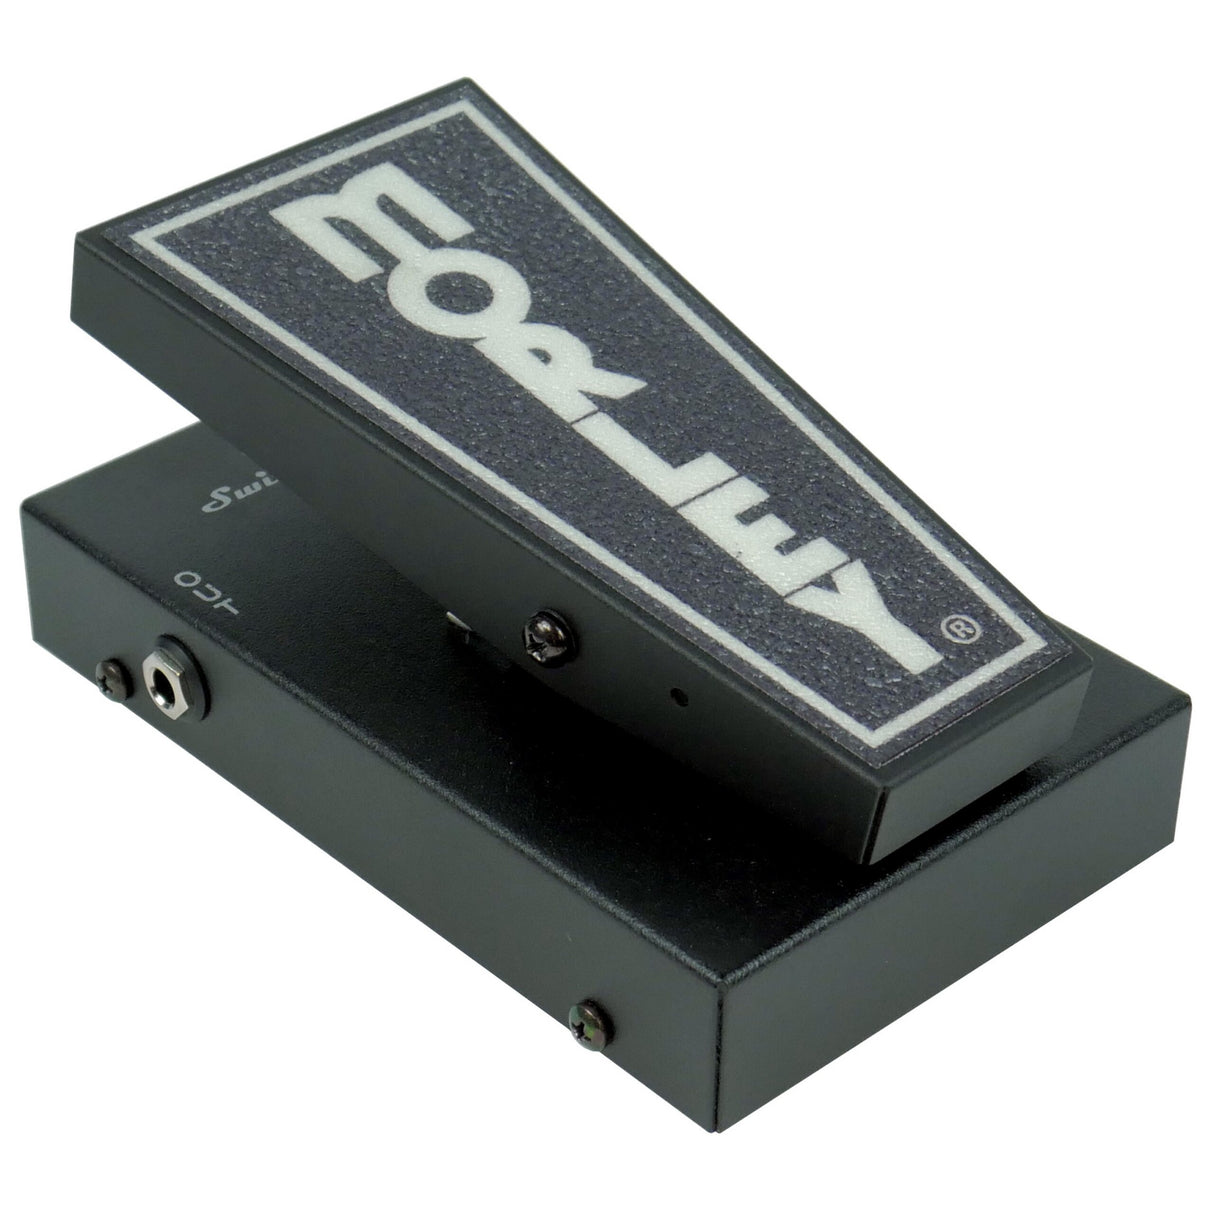 Morley Mini Classic Switchless Wah Pedal